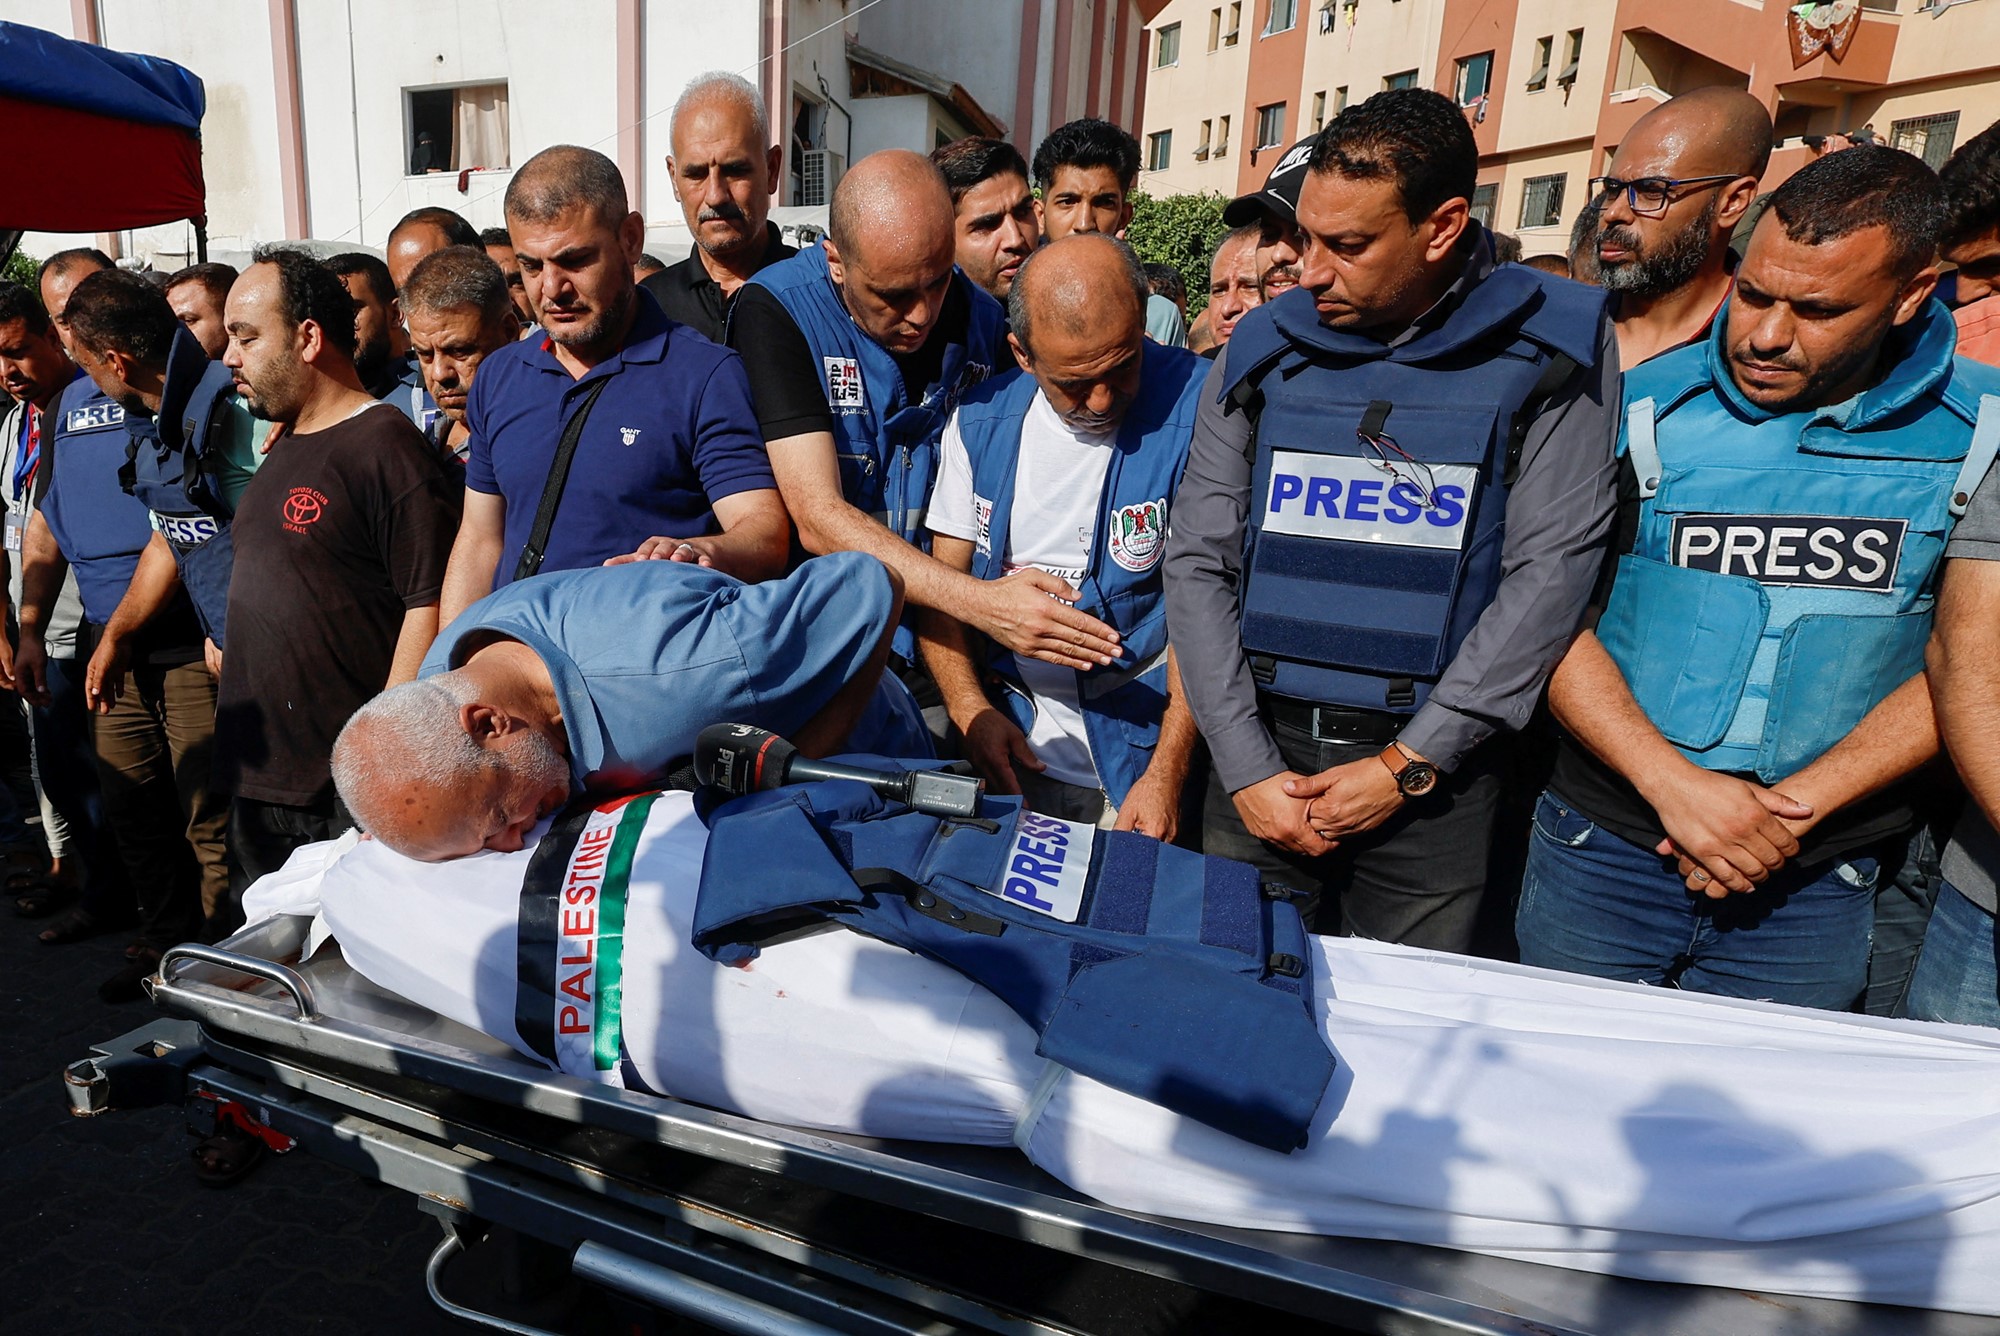 Journalists wearing press vests stand over white sheeted body of journalist wrpped in Palestinan badge. 